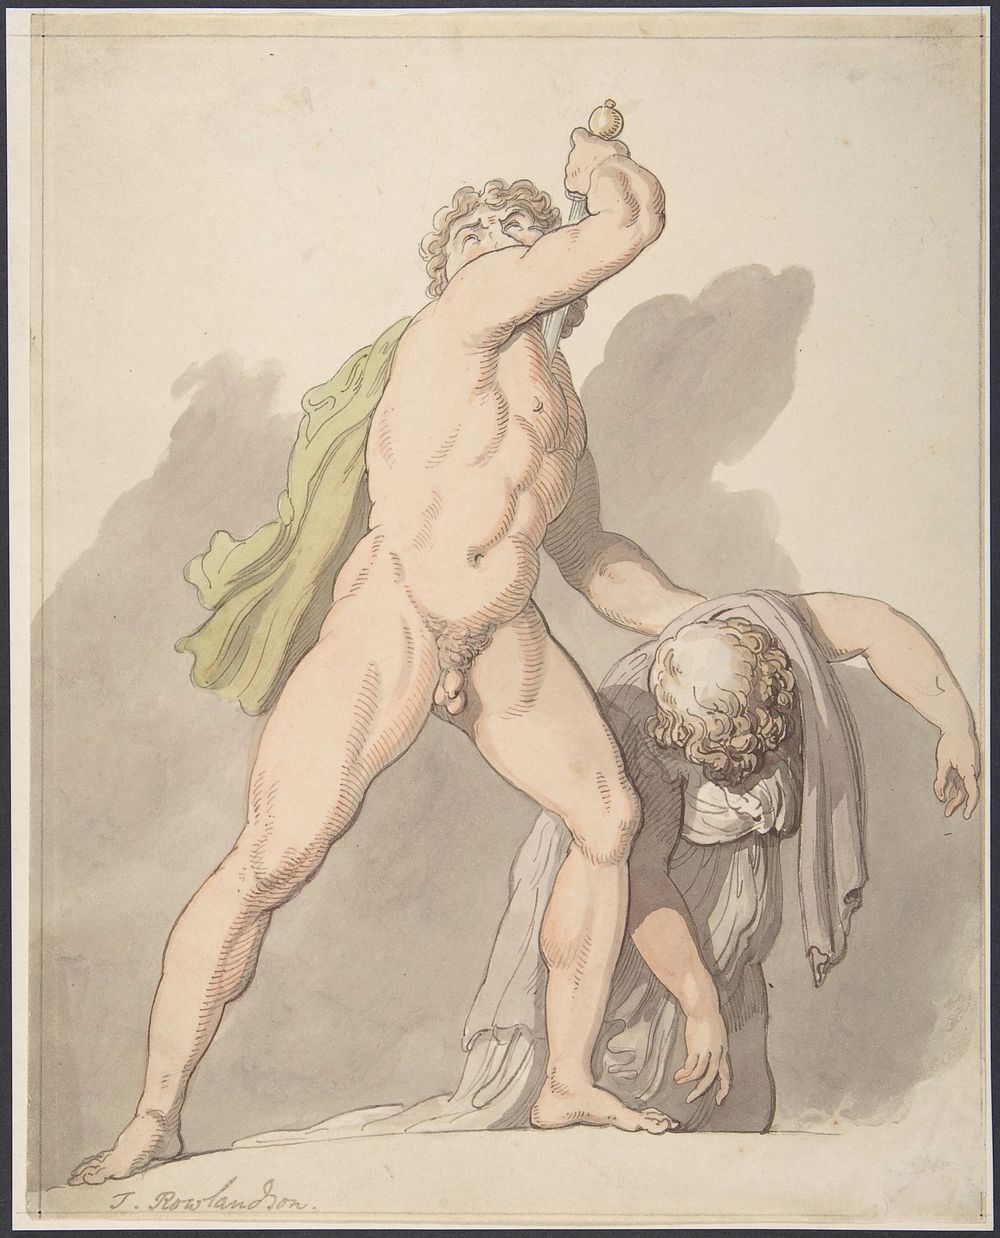 Standing Nude Man Supporting Fainting Female (Ludovisi Gaul in the Uffizi) by Thomas Rowlandson